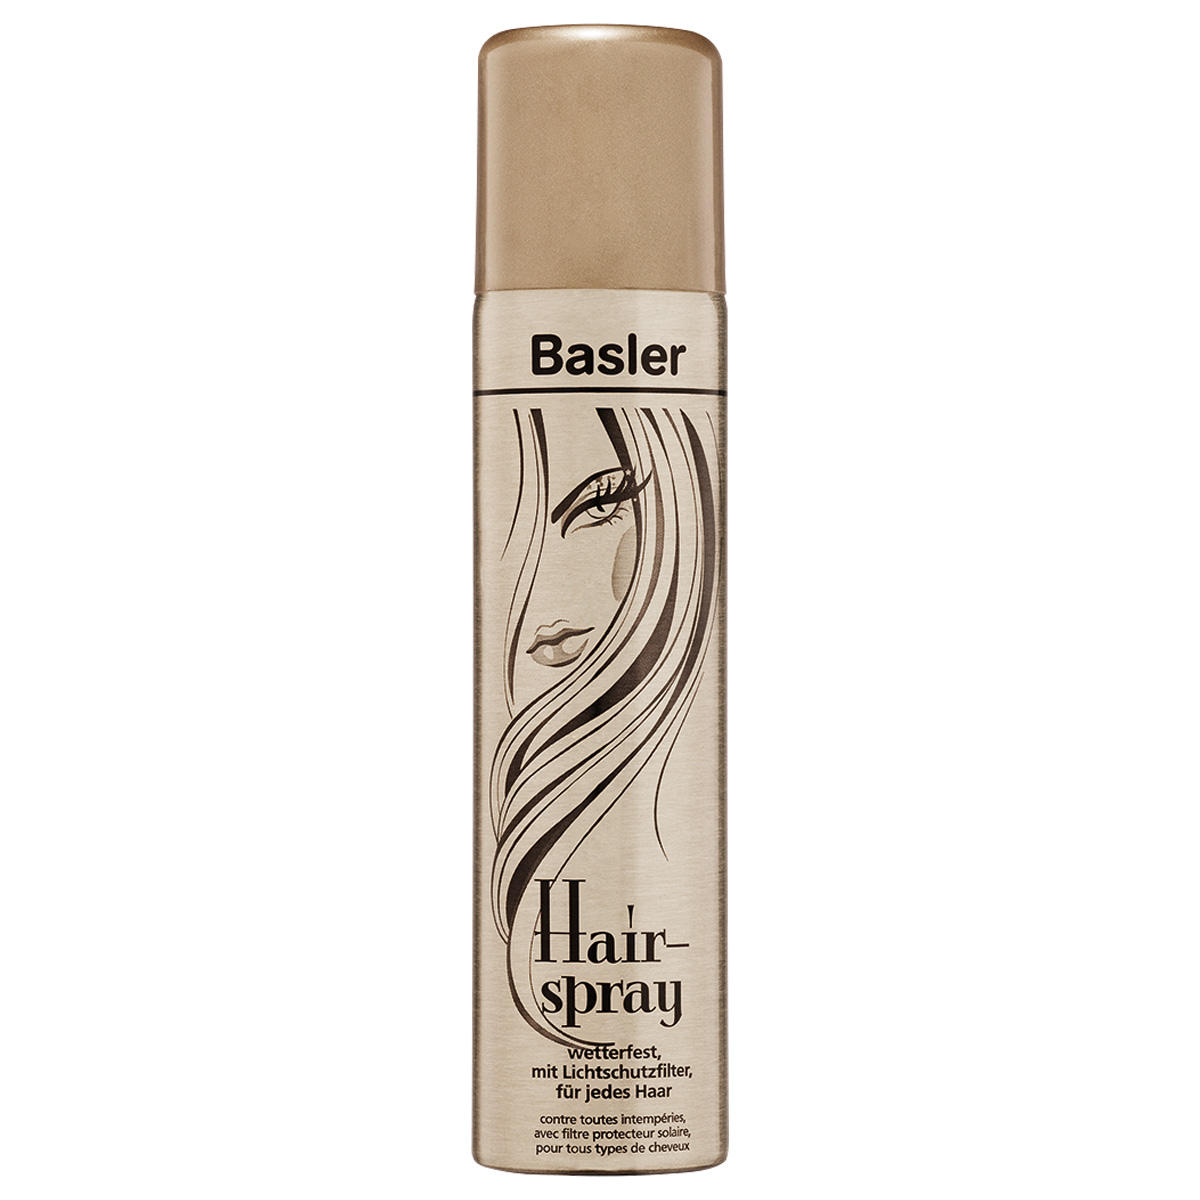 Basler Hairspray with light protection filter Aerosol can 75 ml - 1